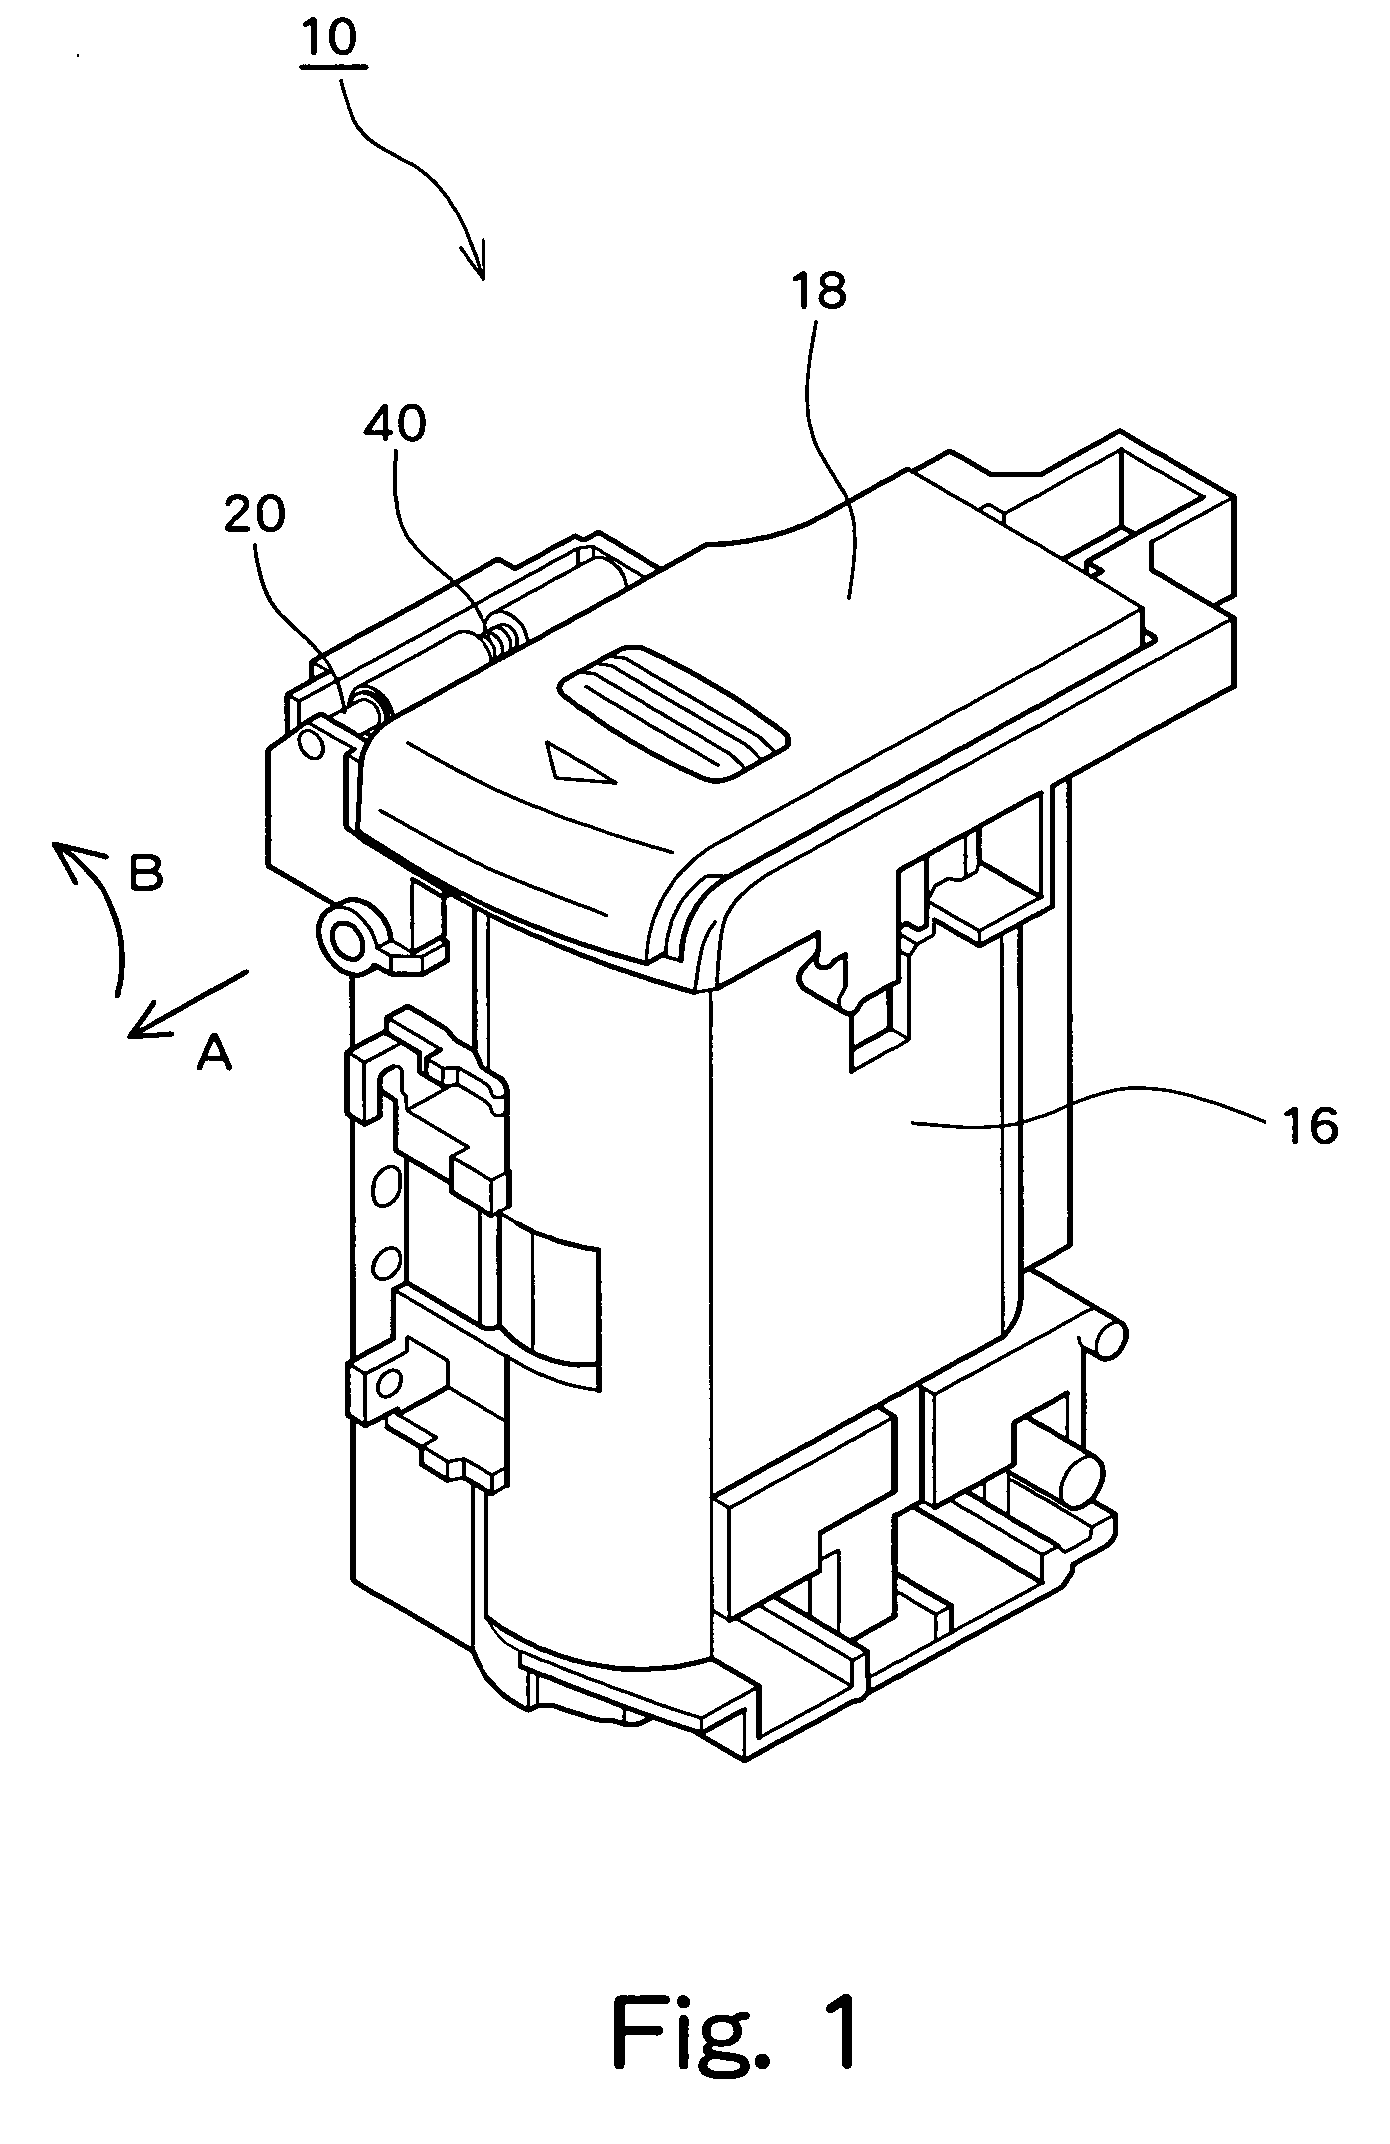 Battery housing structure